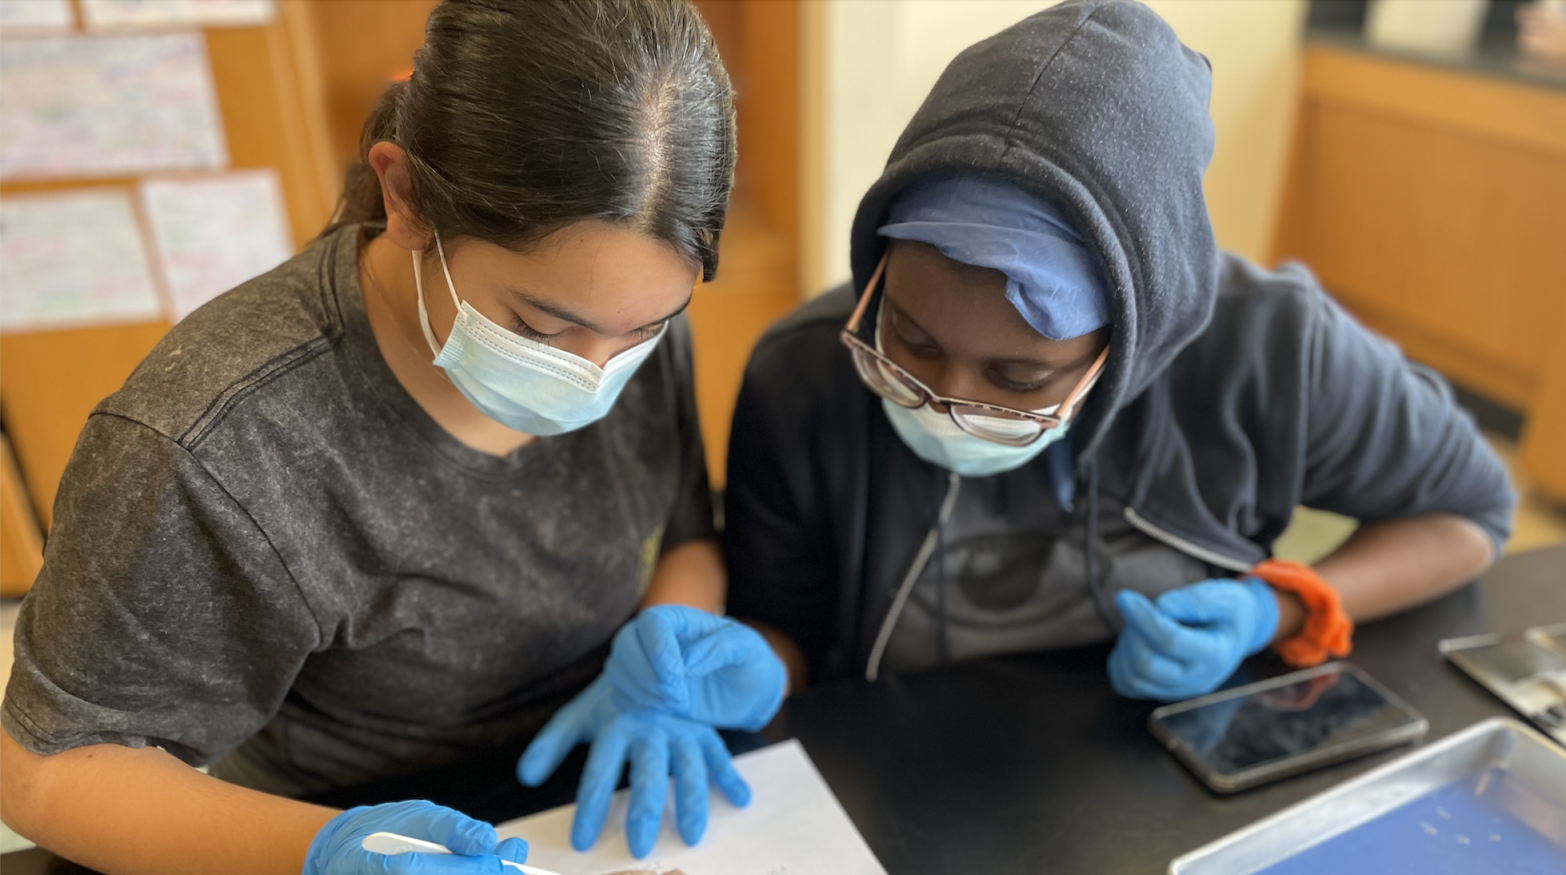 two students working in a lab